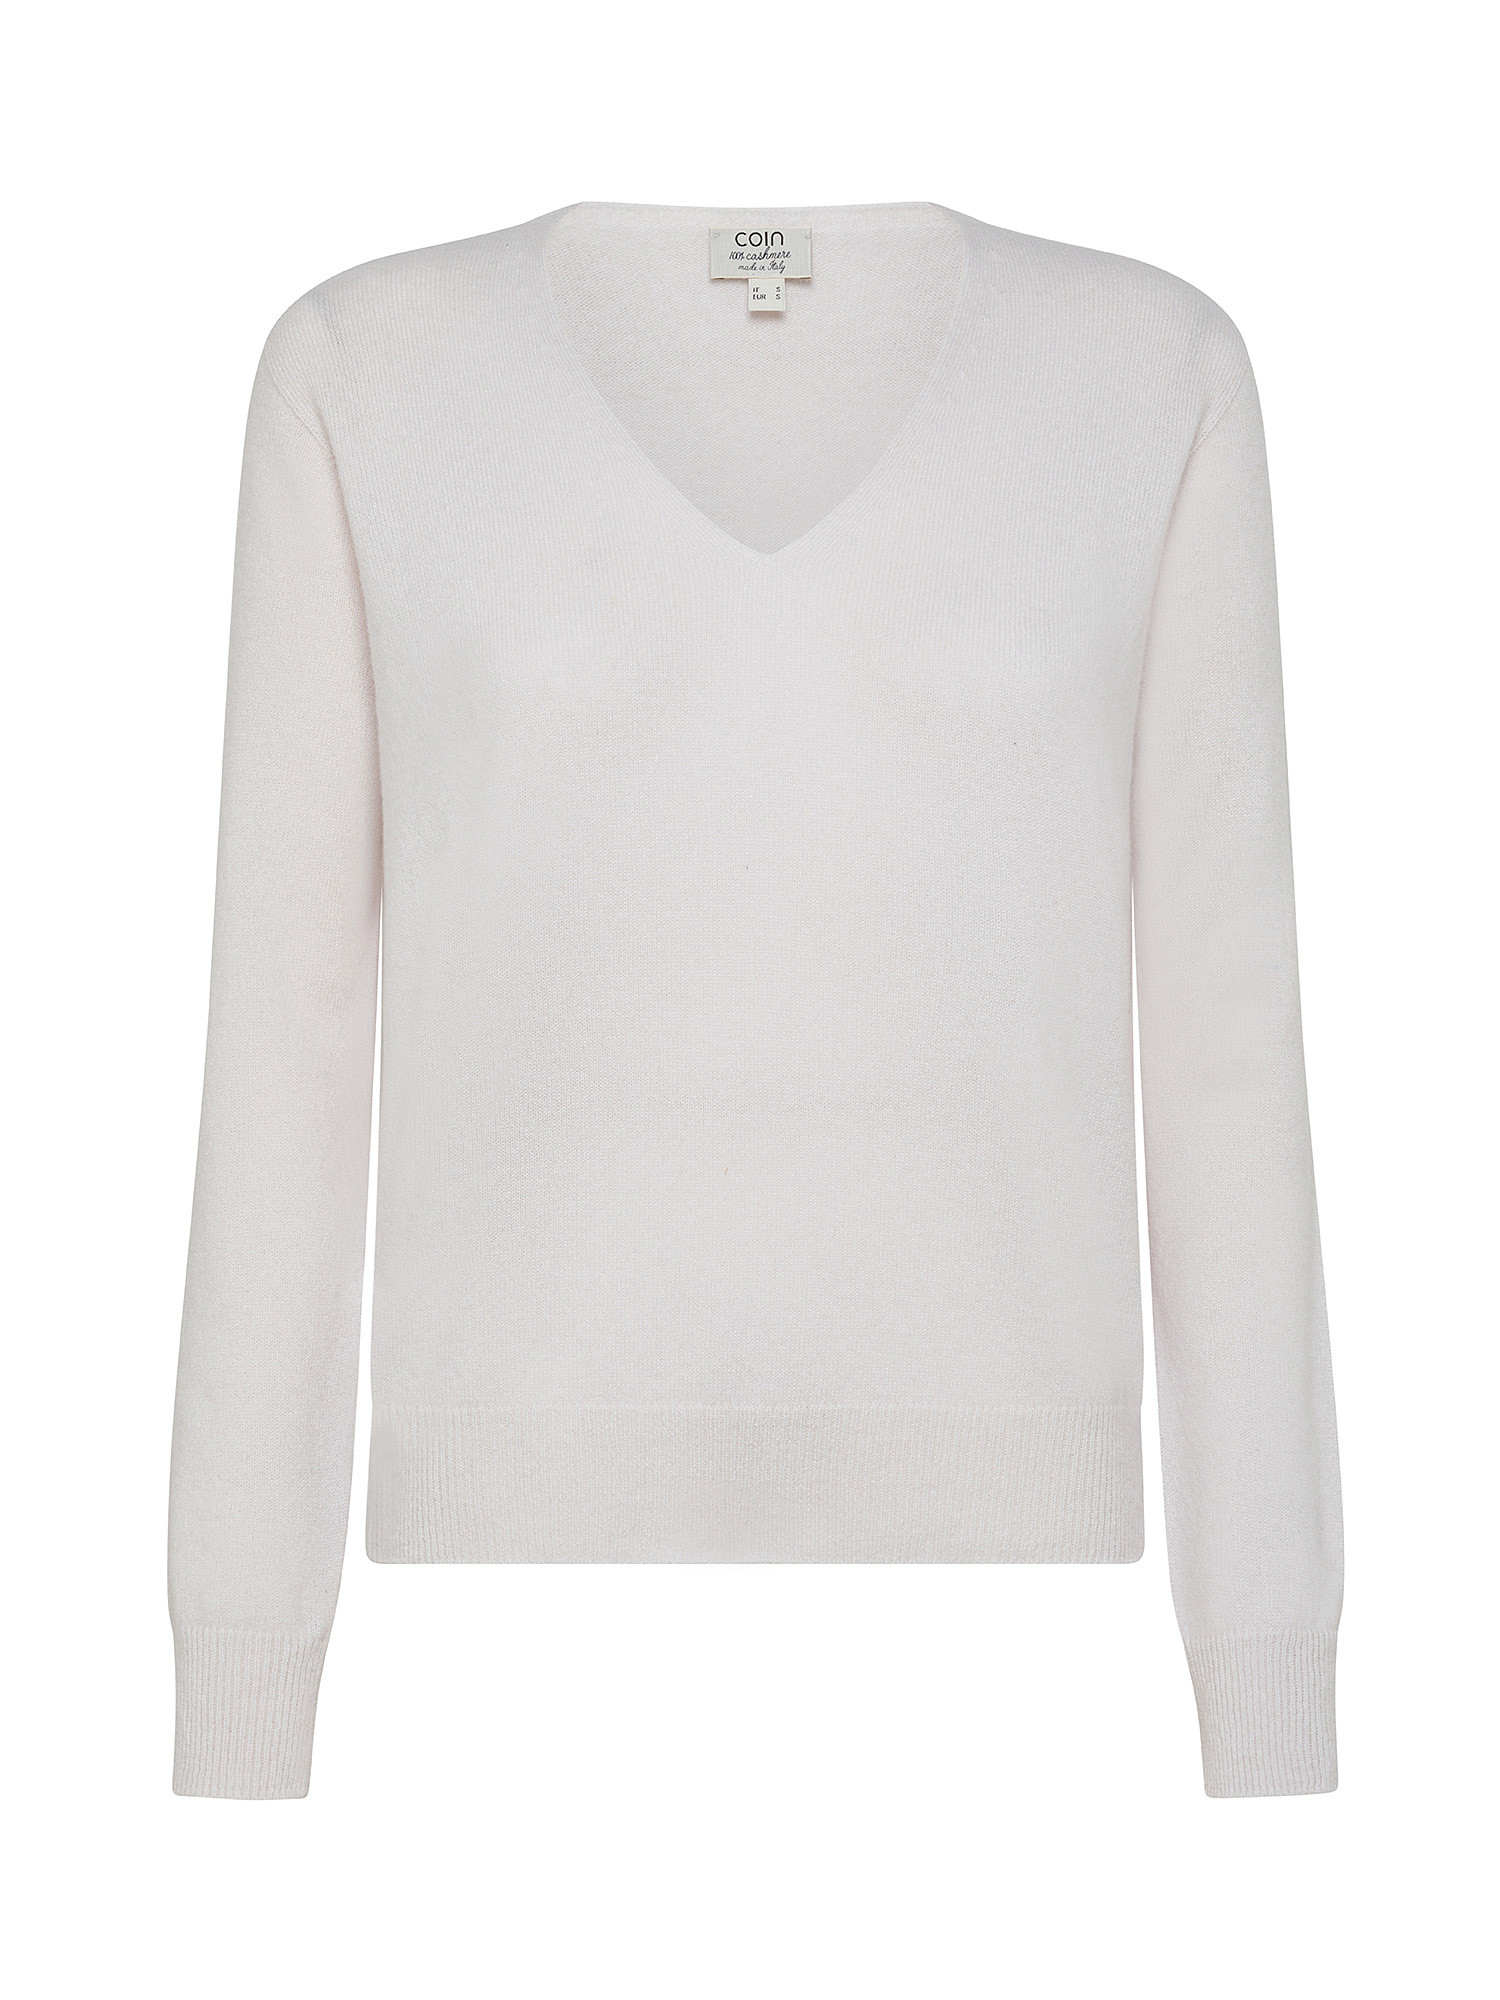 Coin Cashmere - V-neck sweater in pure premium cashmere, White, large image number 0